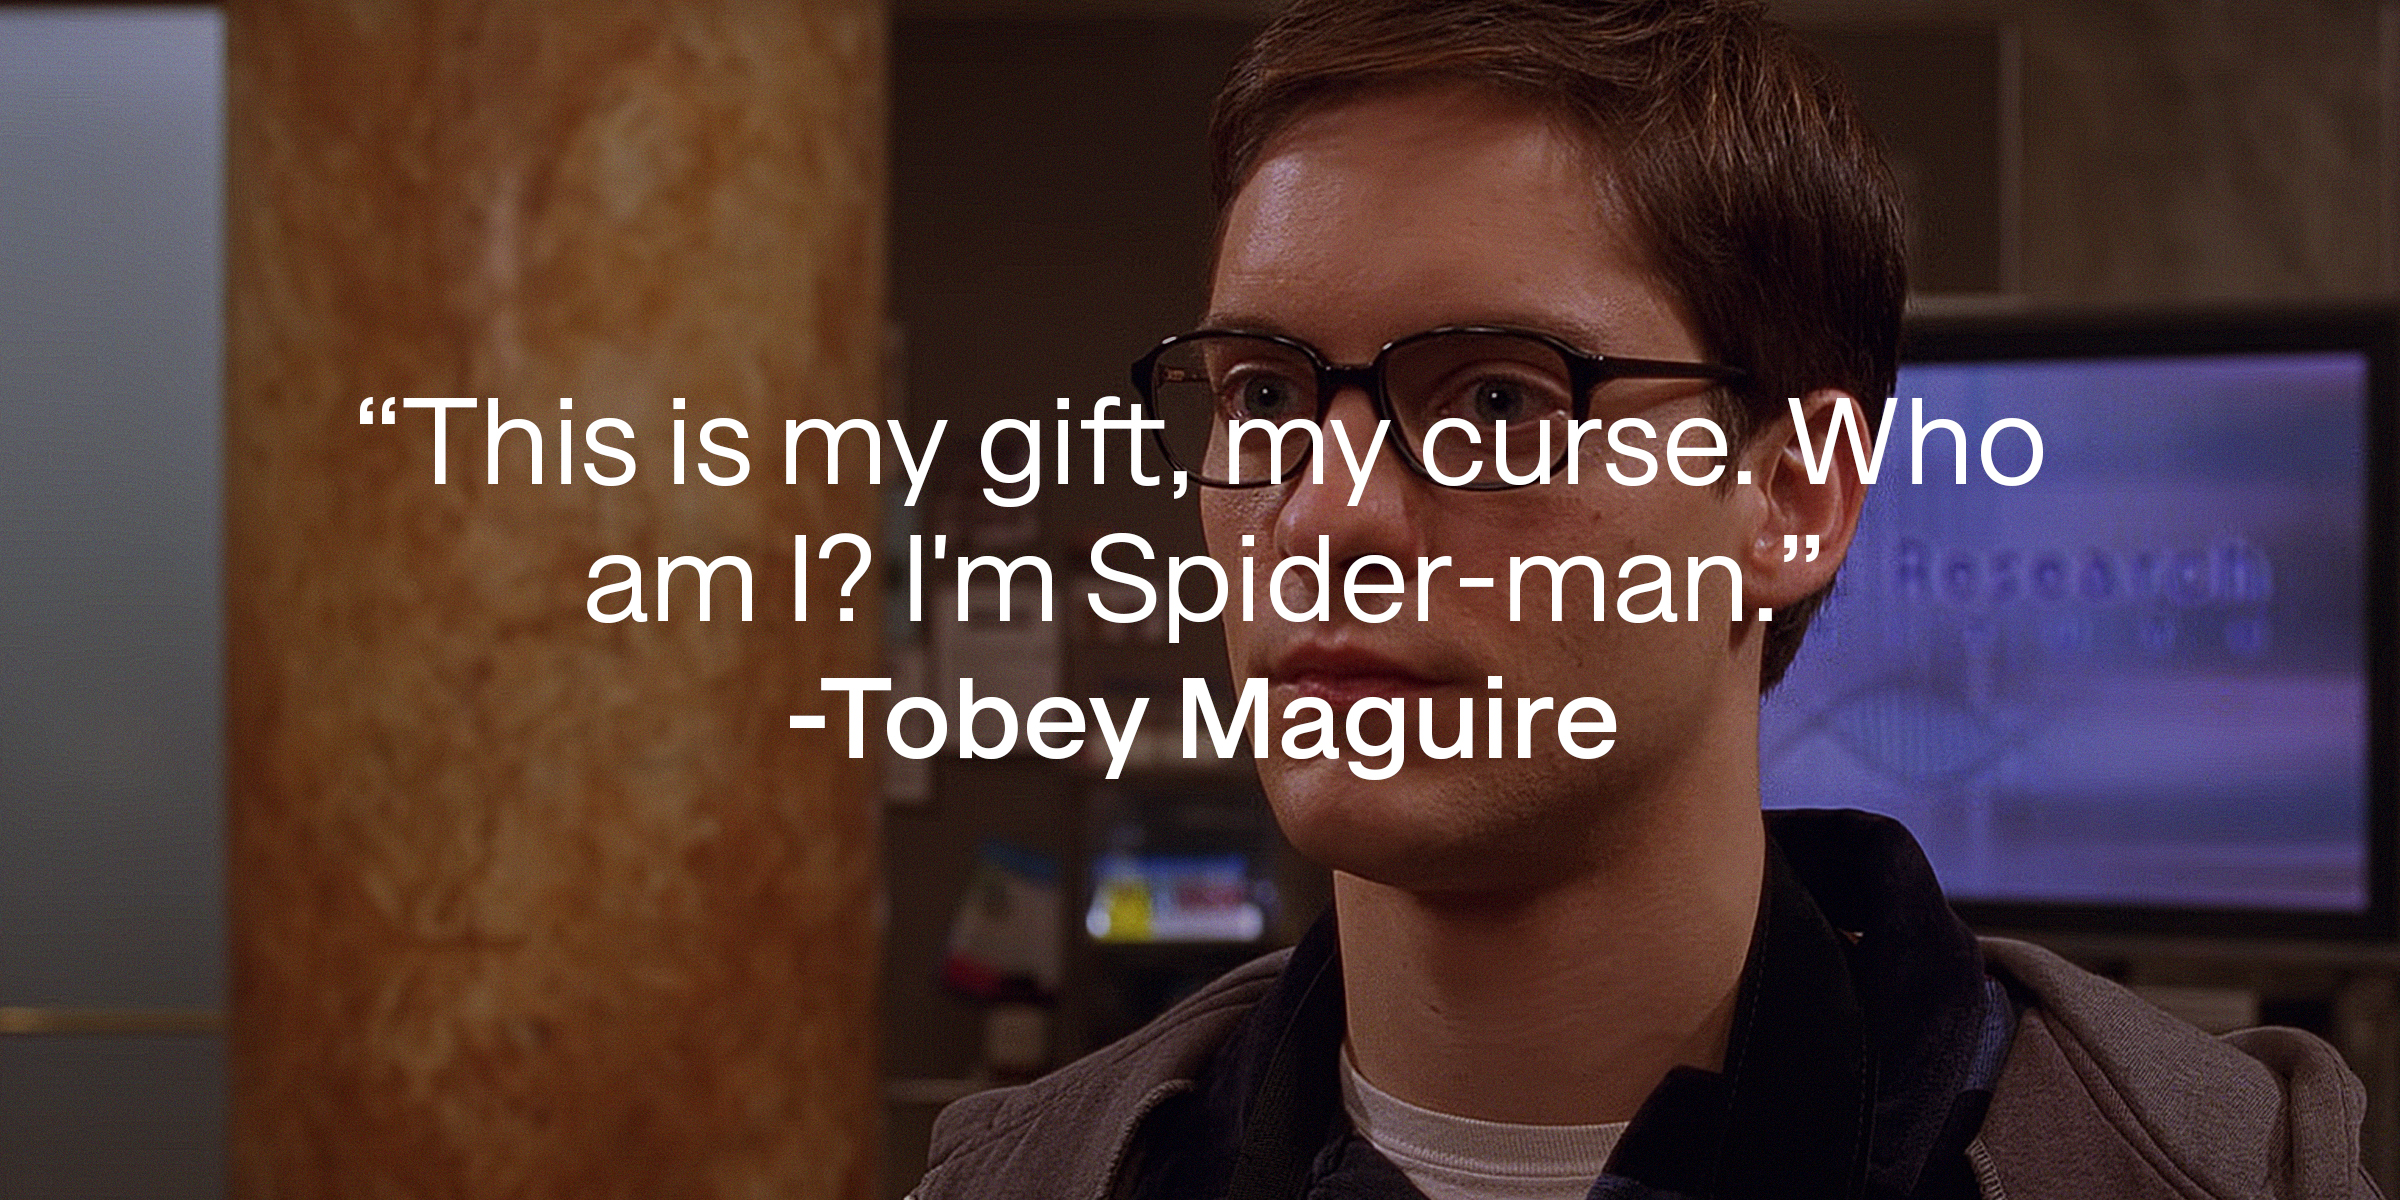 Tobey Maguire's quote: "This is my gift, my curse. Who am I? I'm Spider-man.” | Source: youtube.com/sonypictures